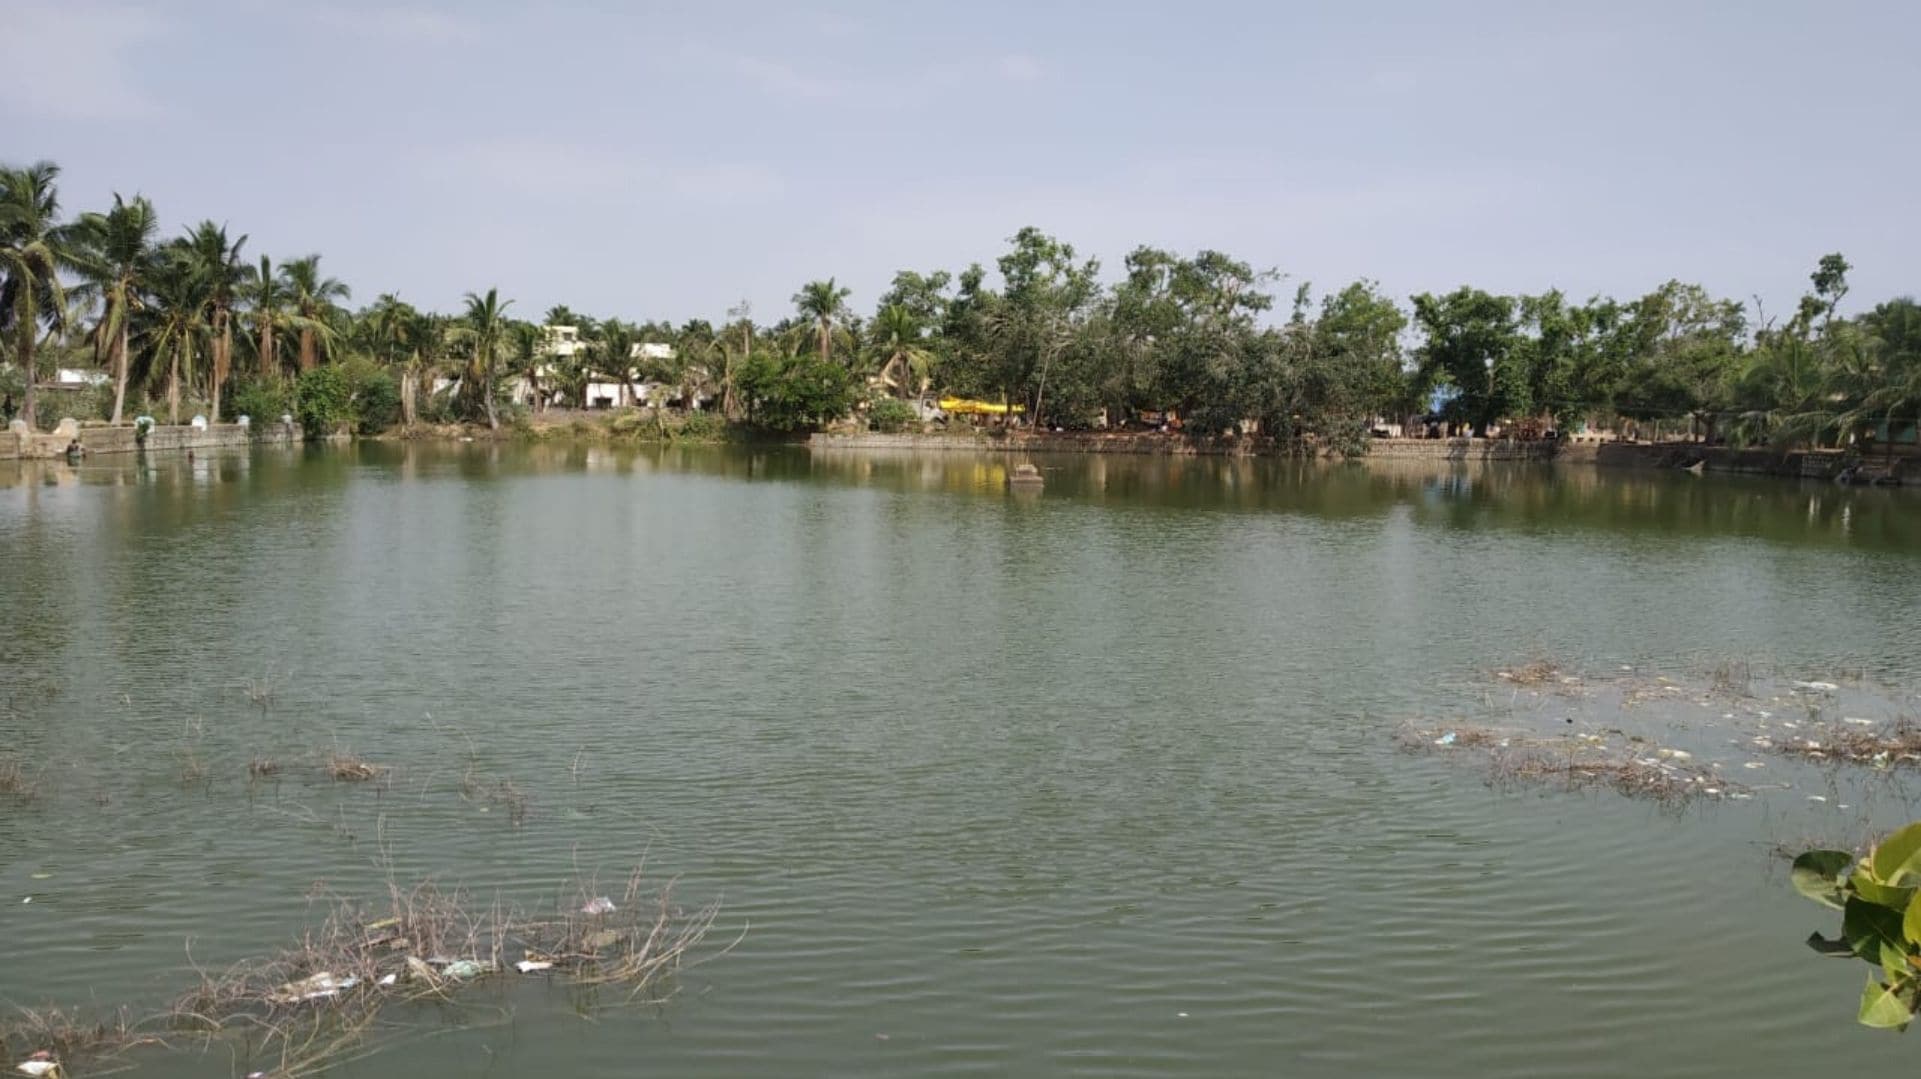 Kaveri delta: How Tamil Nadu's new protected special agricultural zone will impact livelihoods